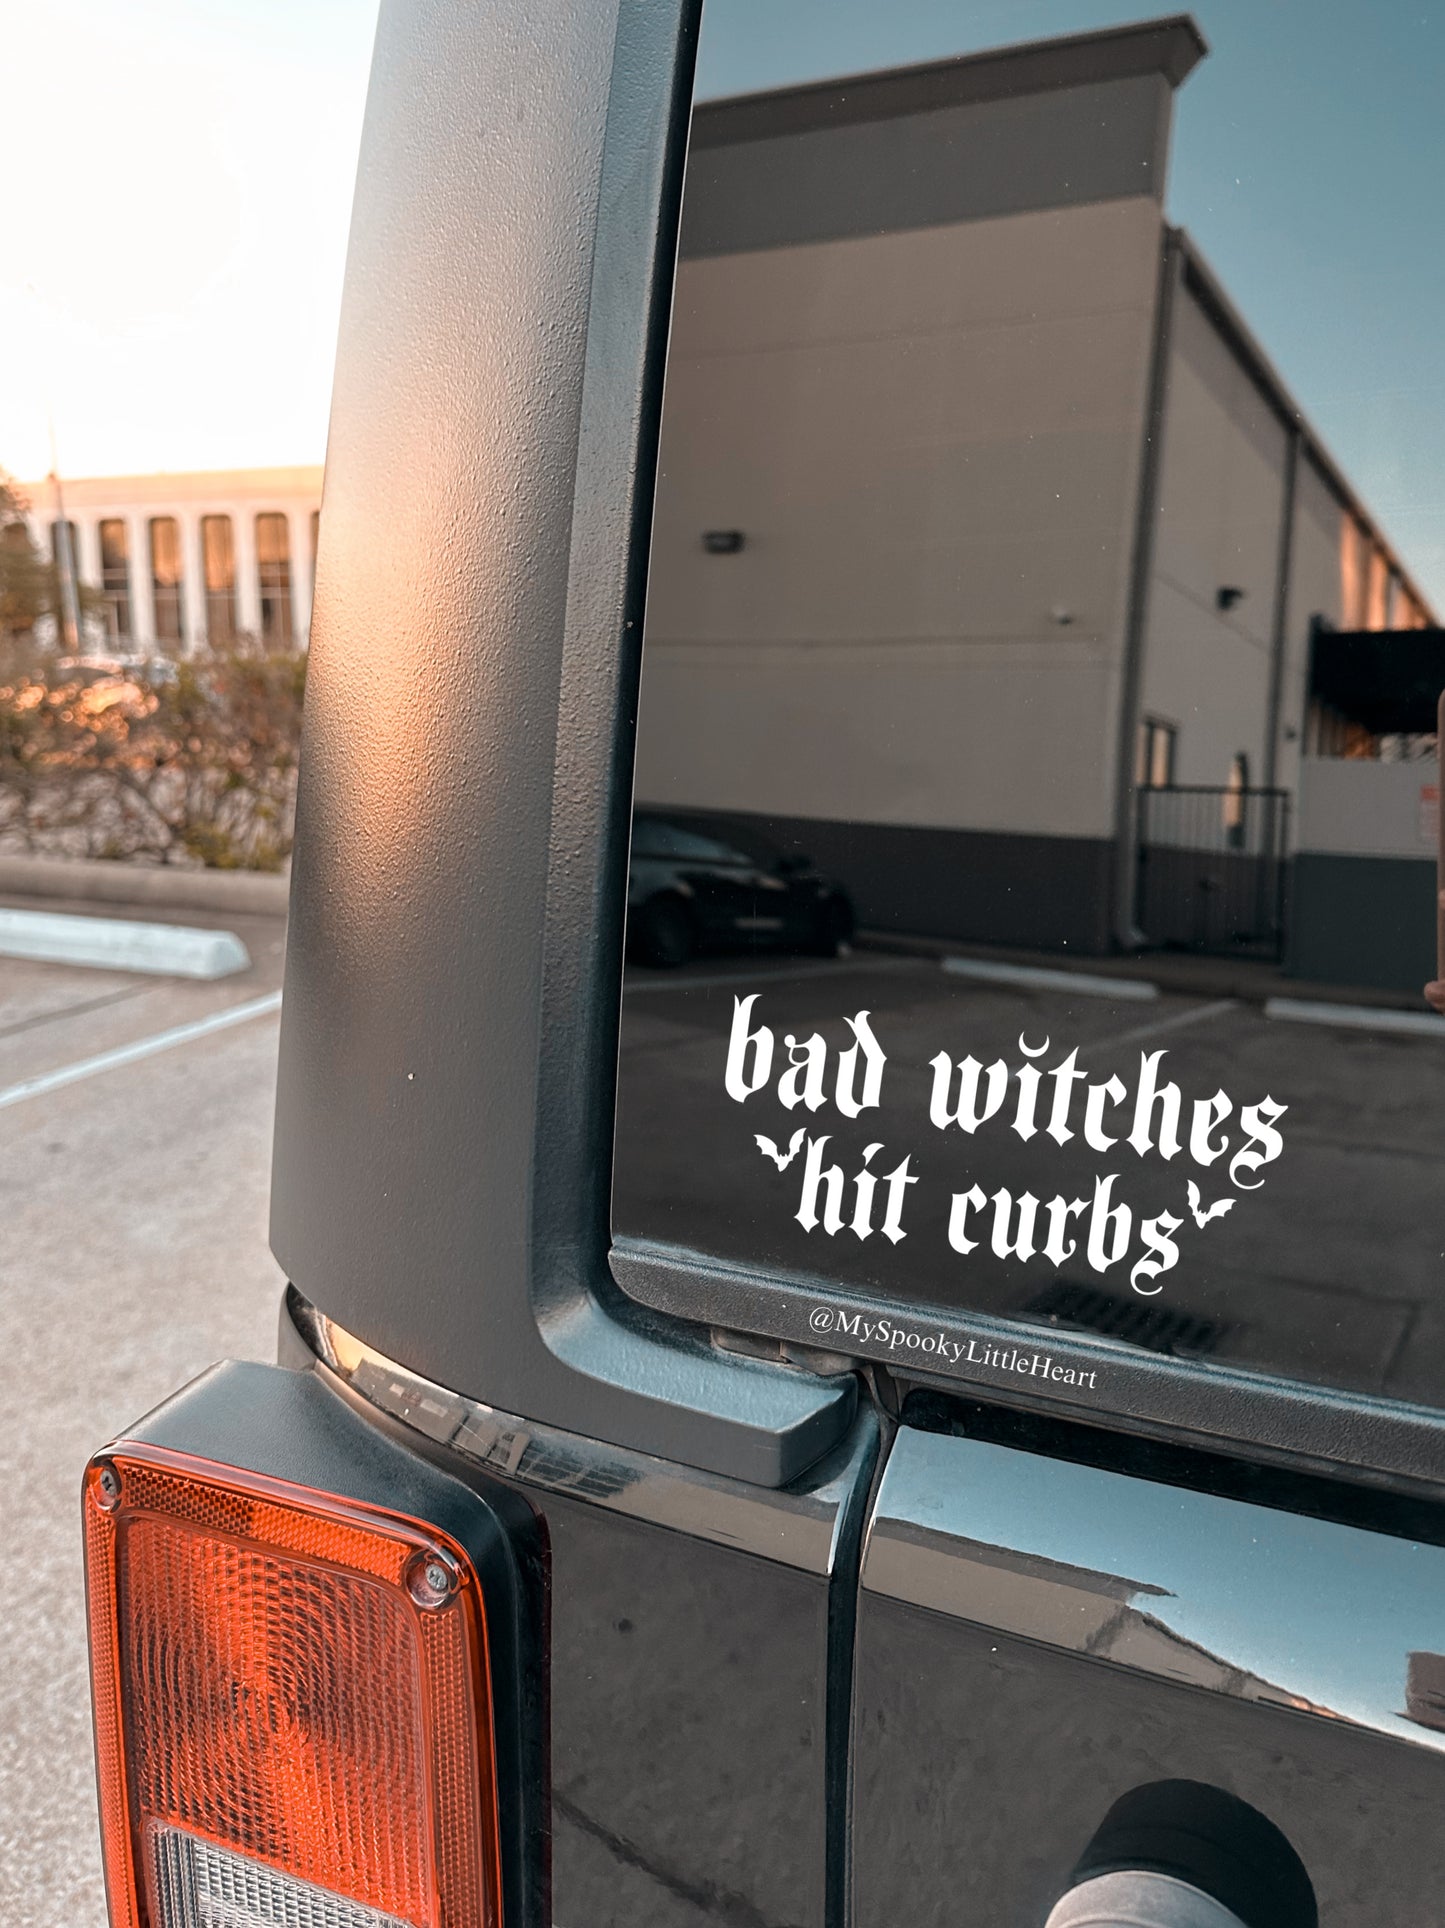 Bad witches Hit Curbs Car Vinyl Decal